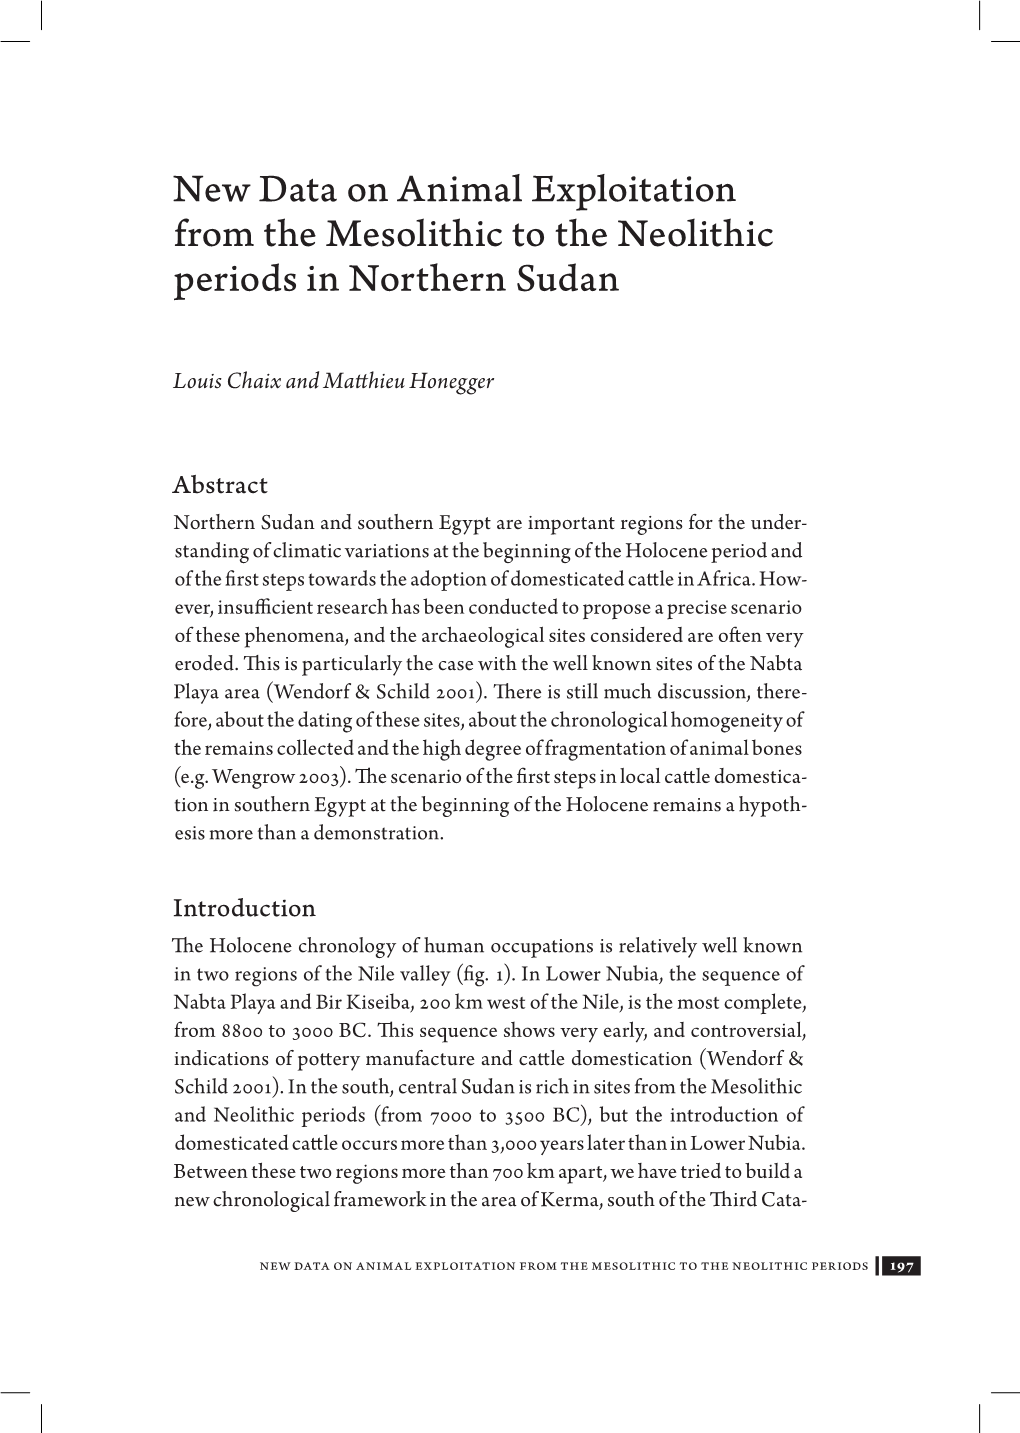 New Data on Animal Exploitation from the Mesolithic to the Neolithic Periods in Northern Sudan